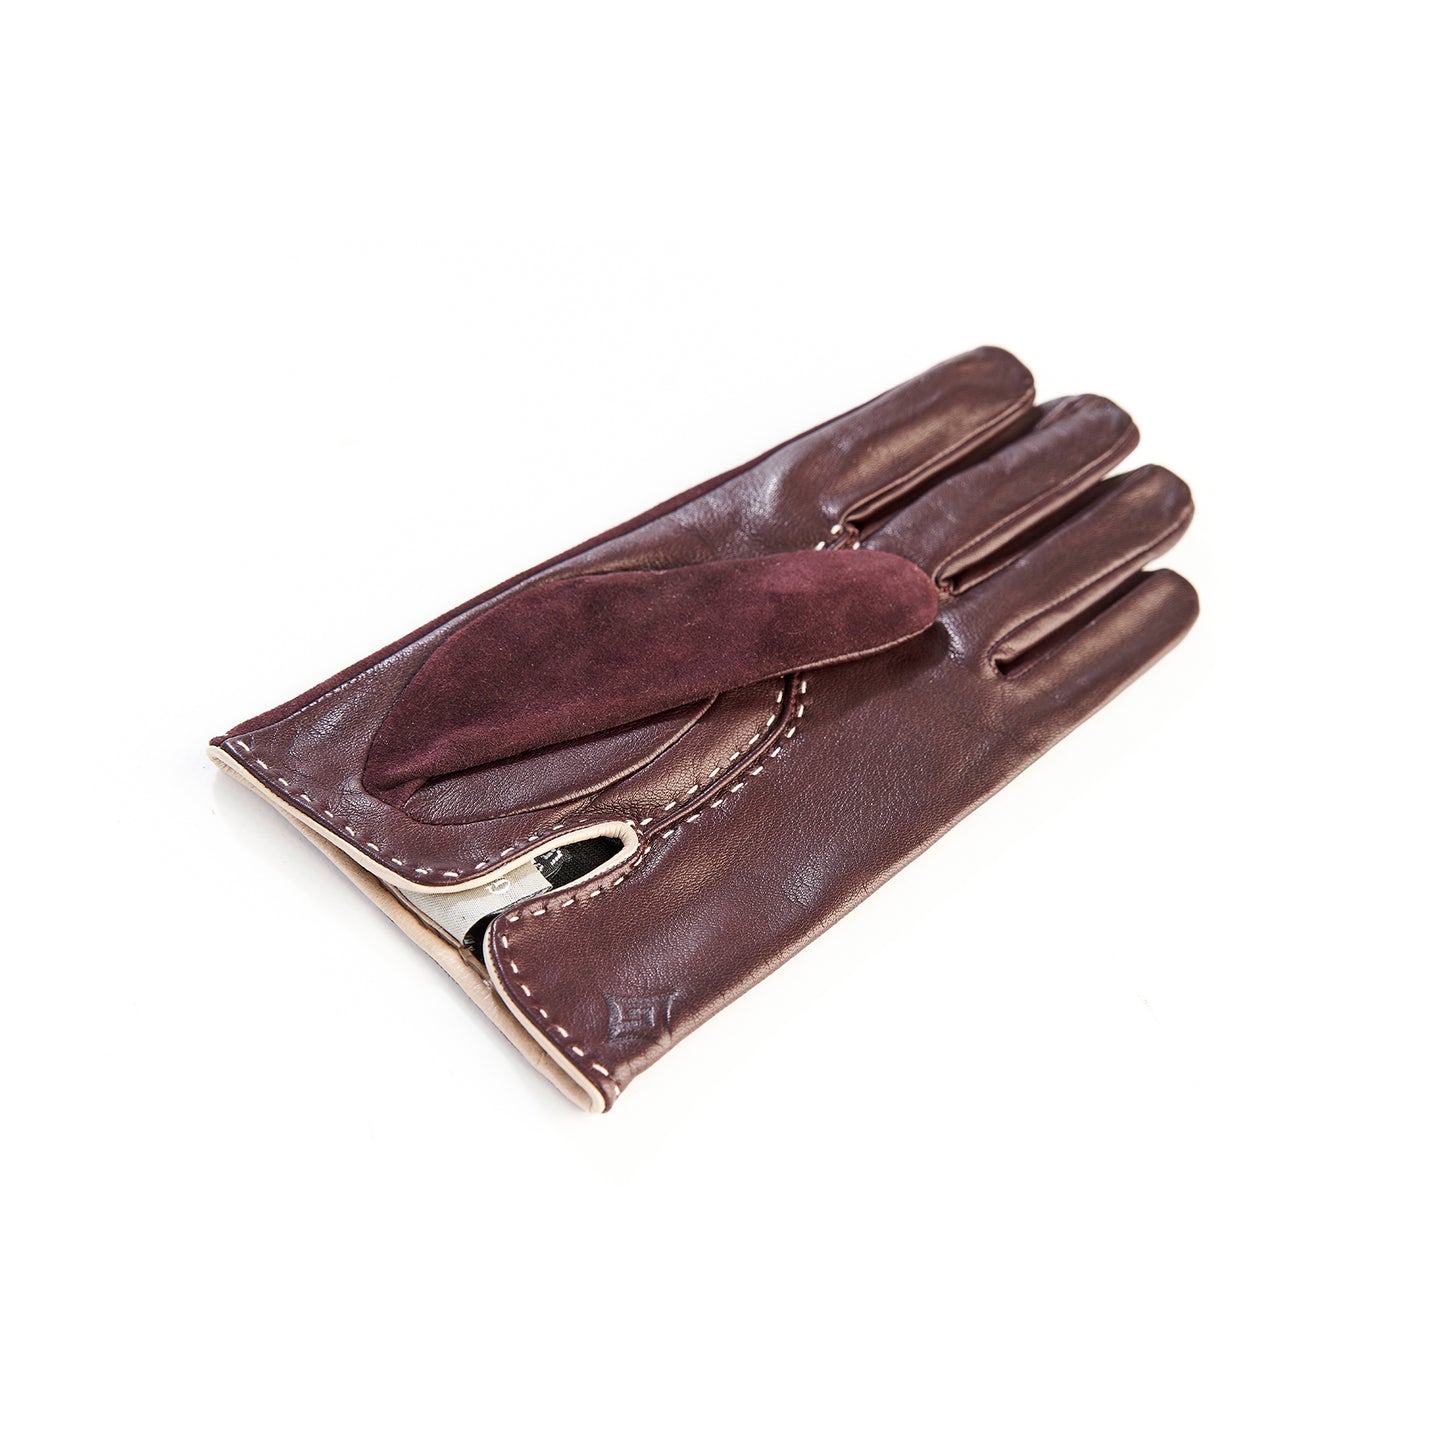 Men's elegant bordeaux suede and sheep leather combination gloves with hand-stitch details and silk lining